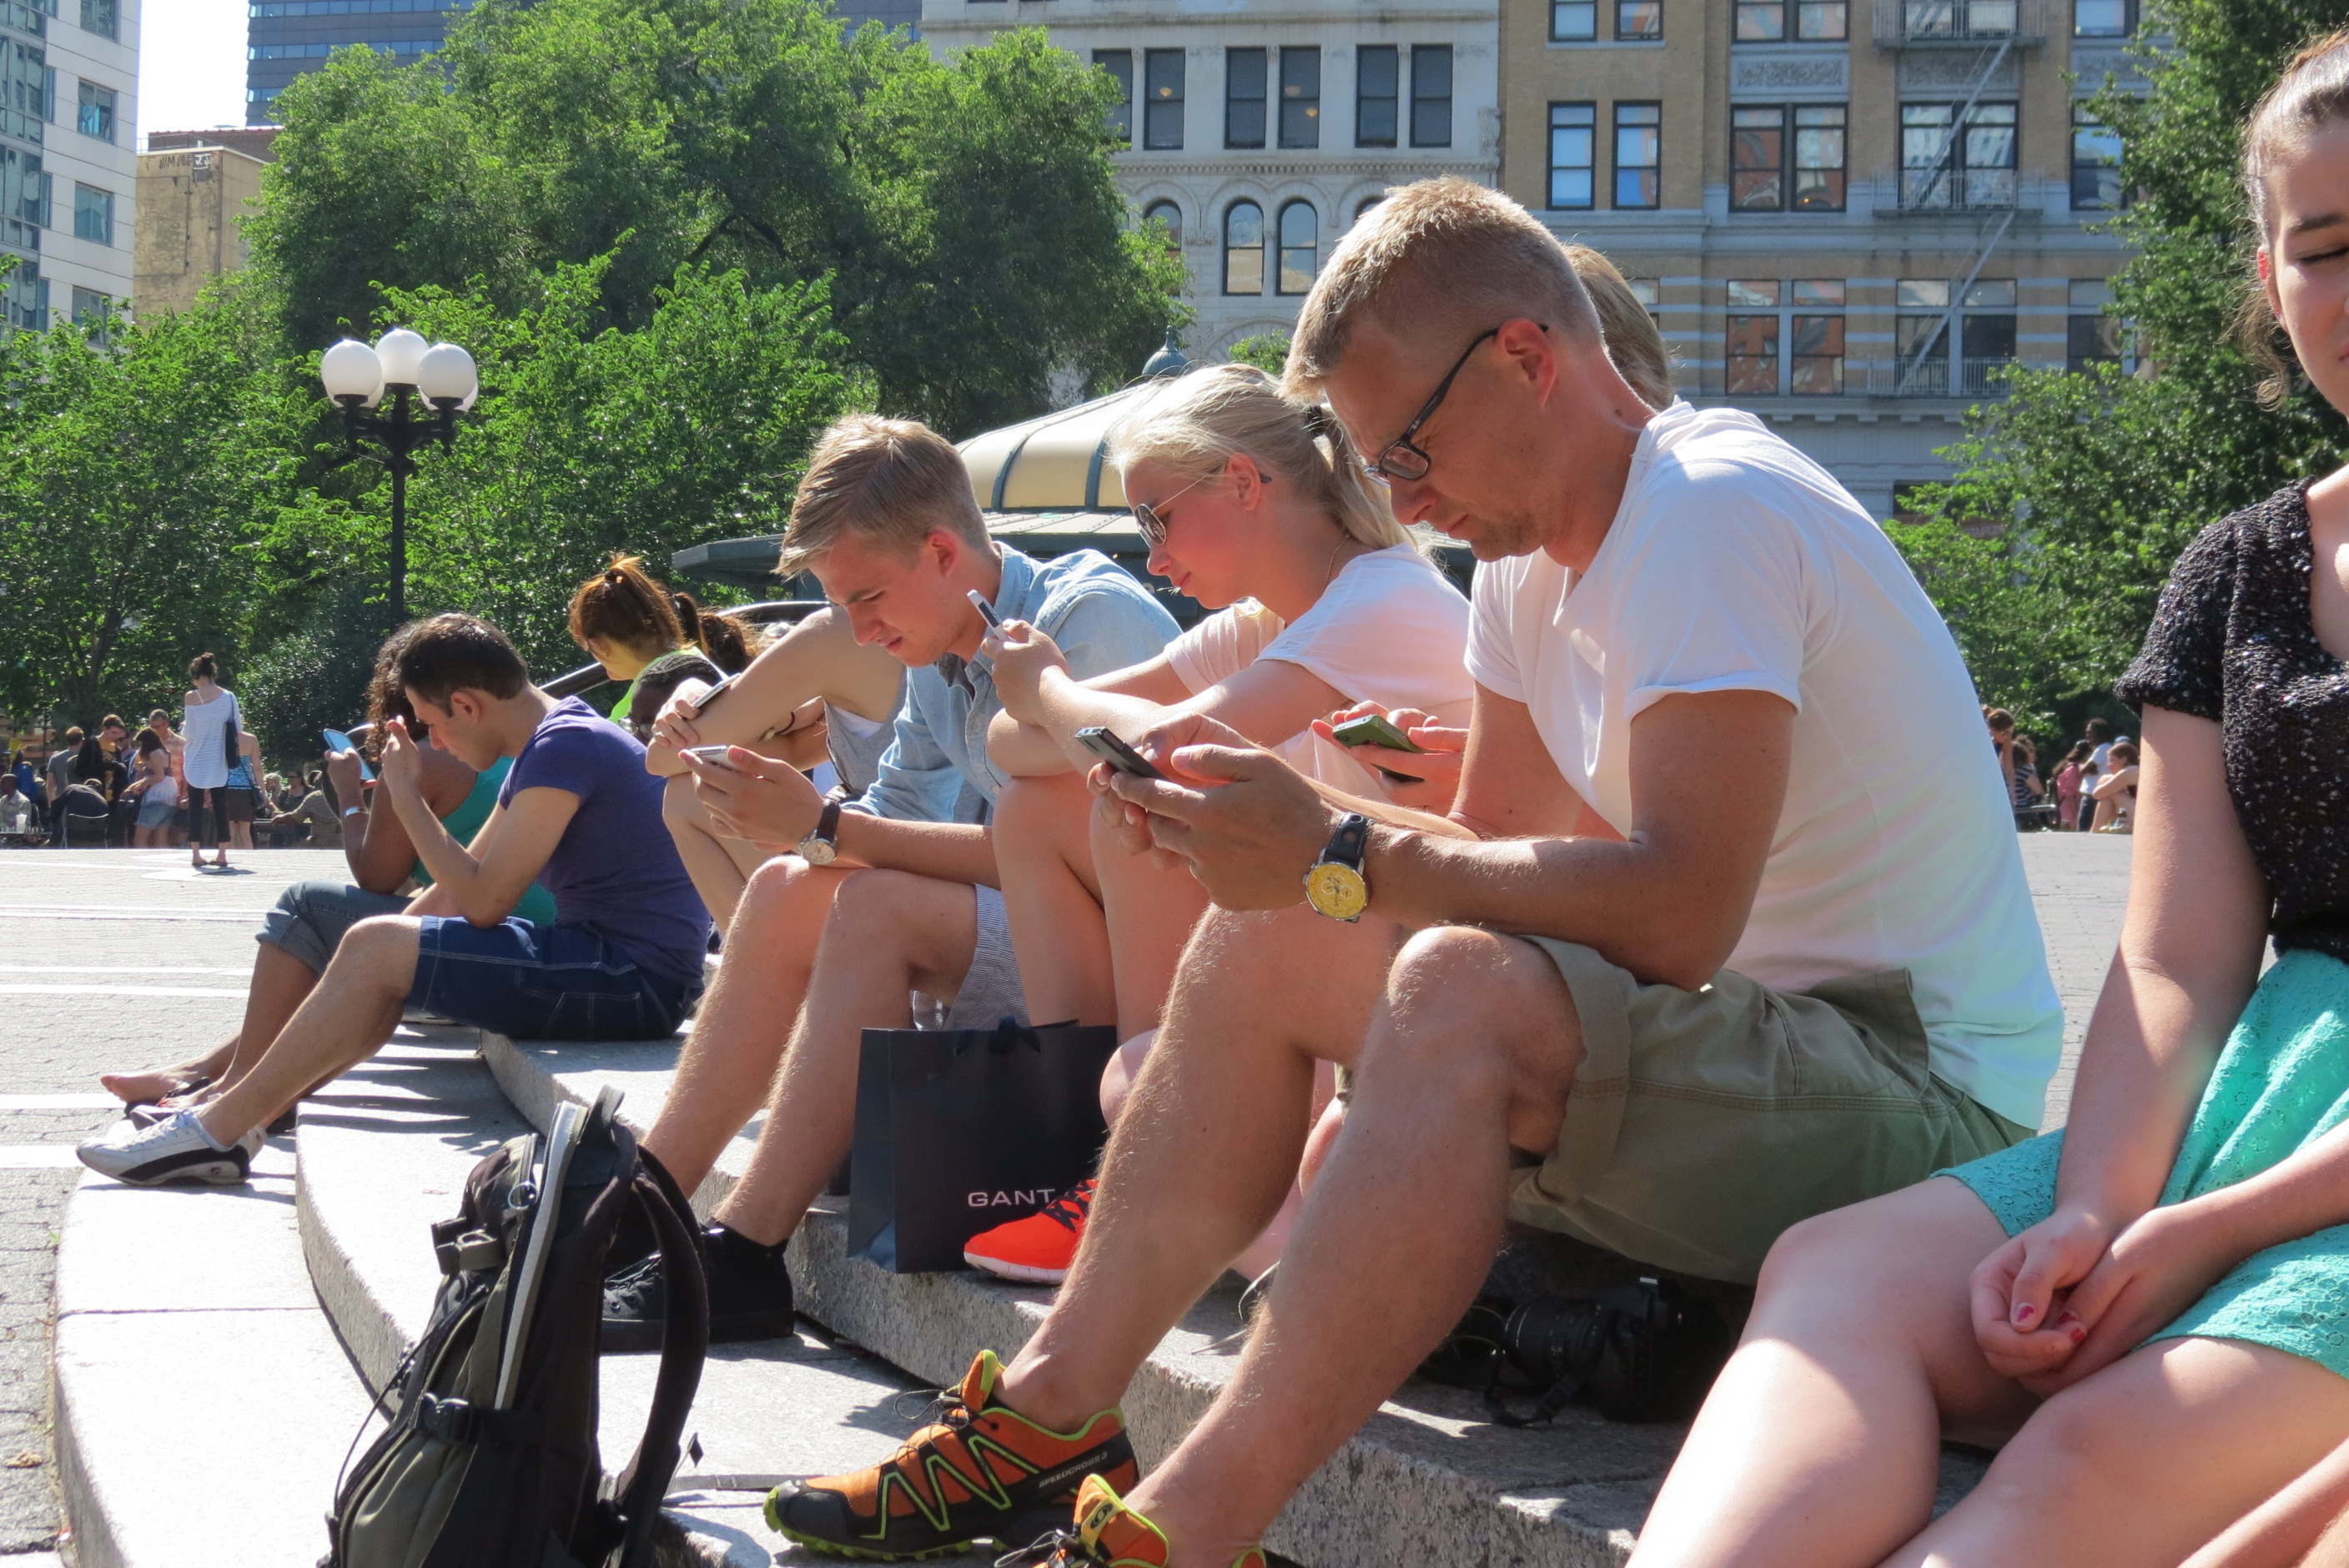 A tourist family in New York City ignore each other & stare at their phones